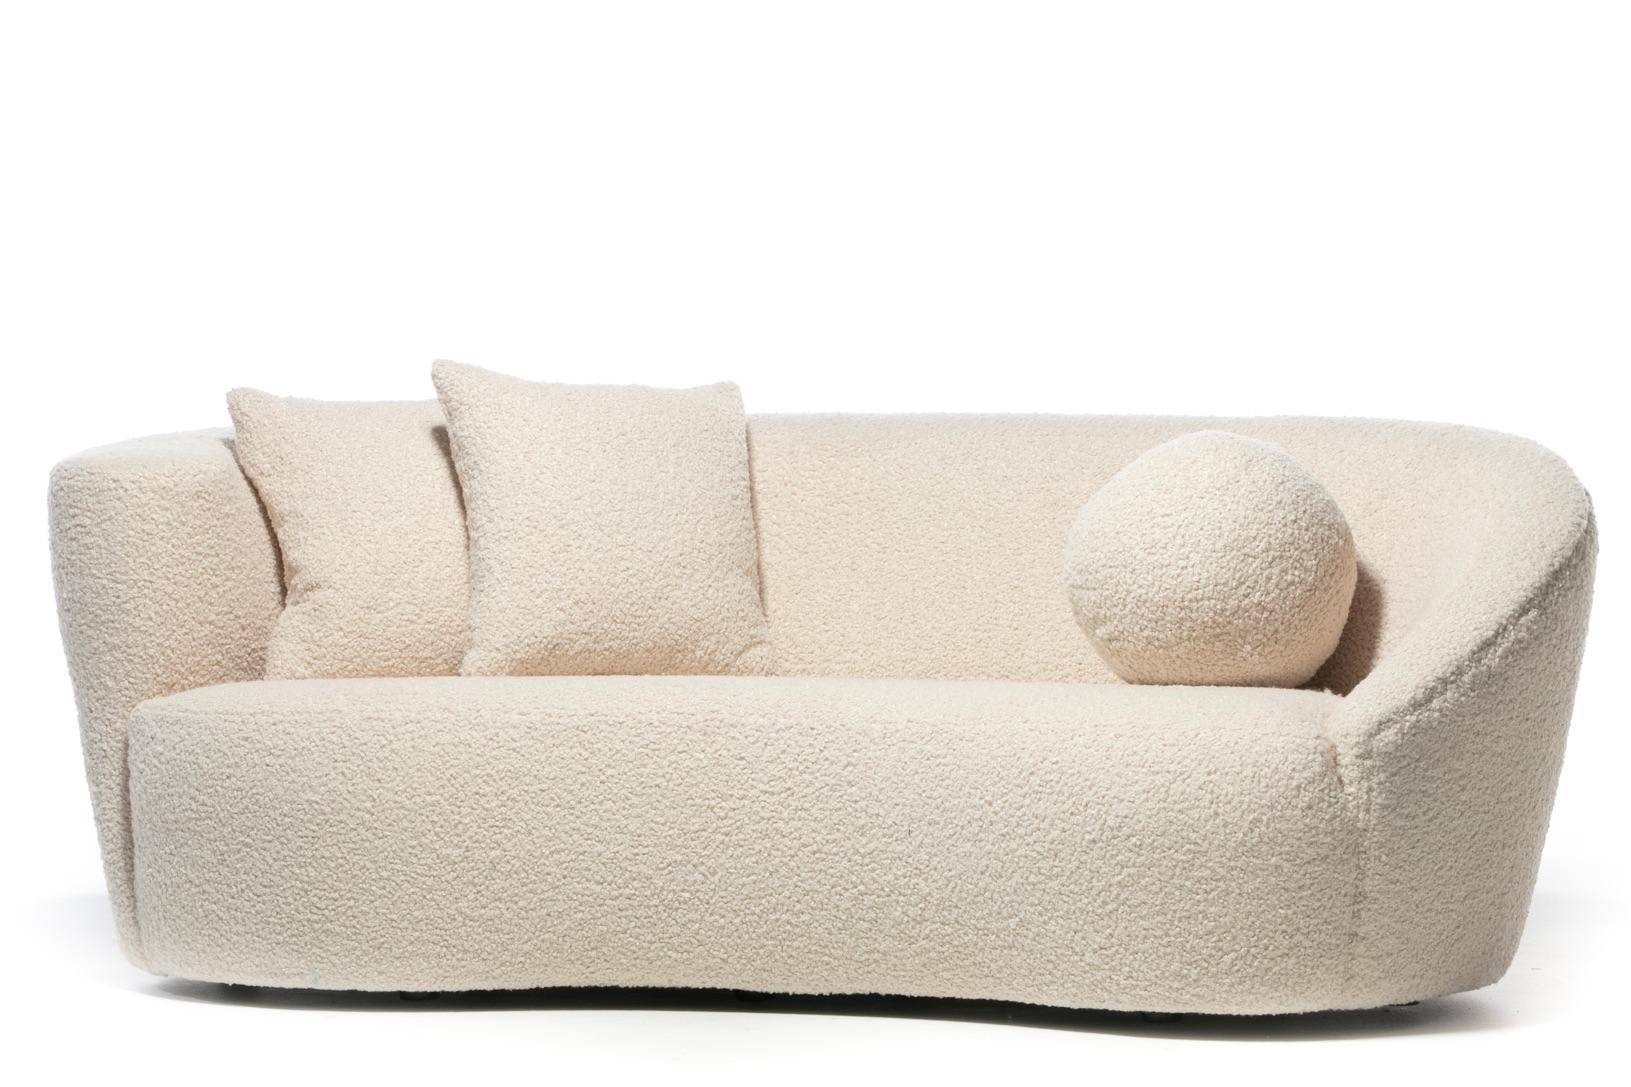 Vladimir Kagan Nautilus Sofa in Ivory White Bouclé by Directional, c. 1990 In Good Condition For Sale In Saint Louis, MO